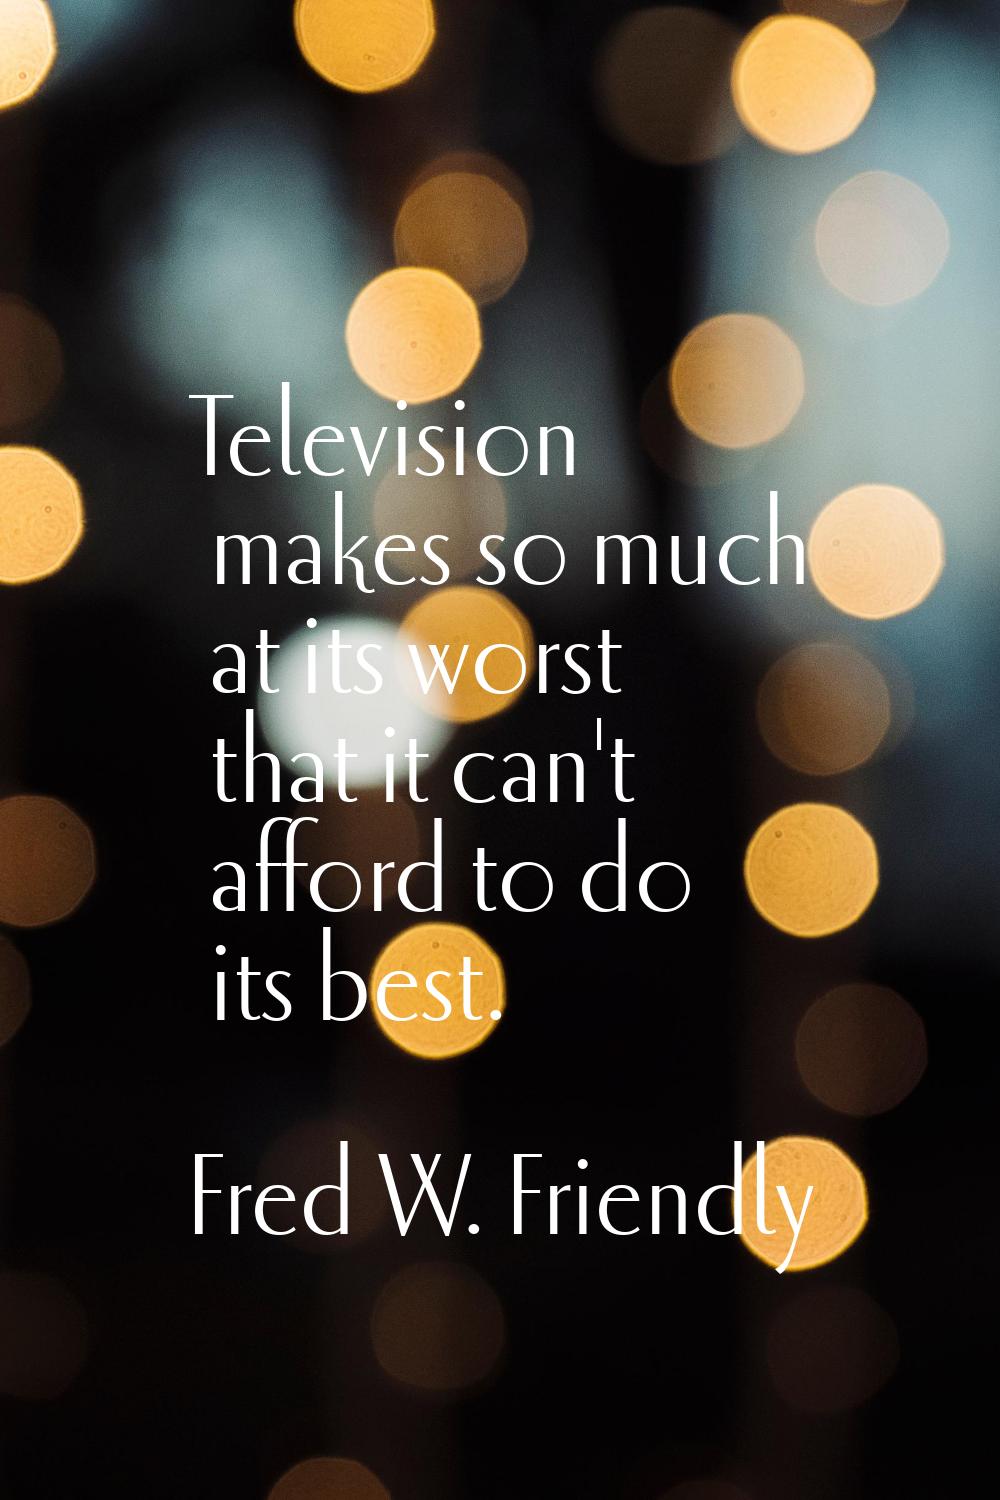 Television makes so much at its worst that it can't afford to do its best.